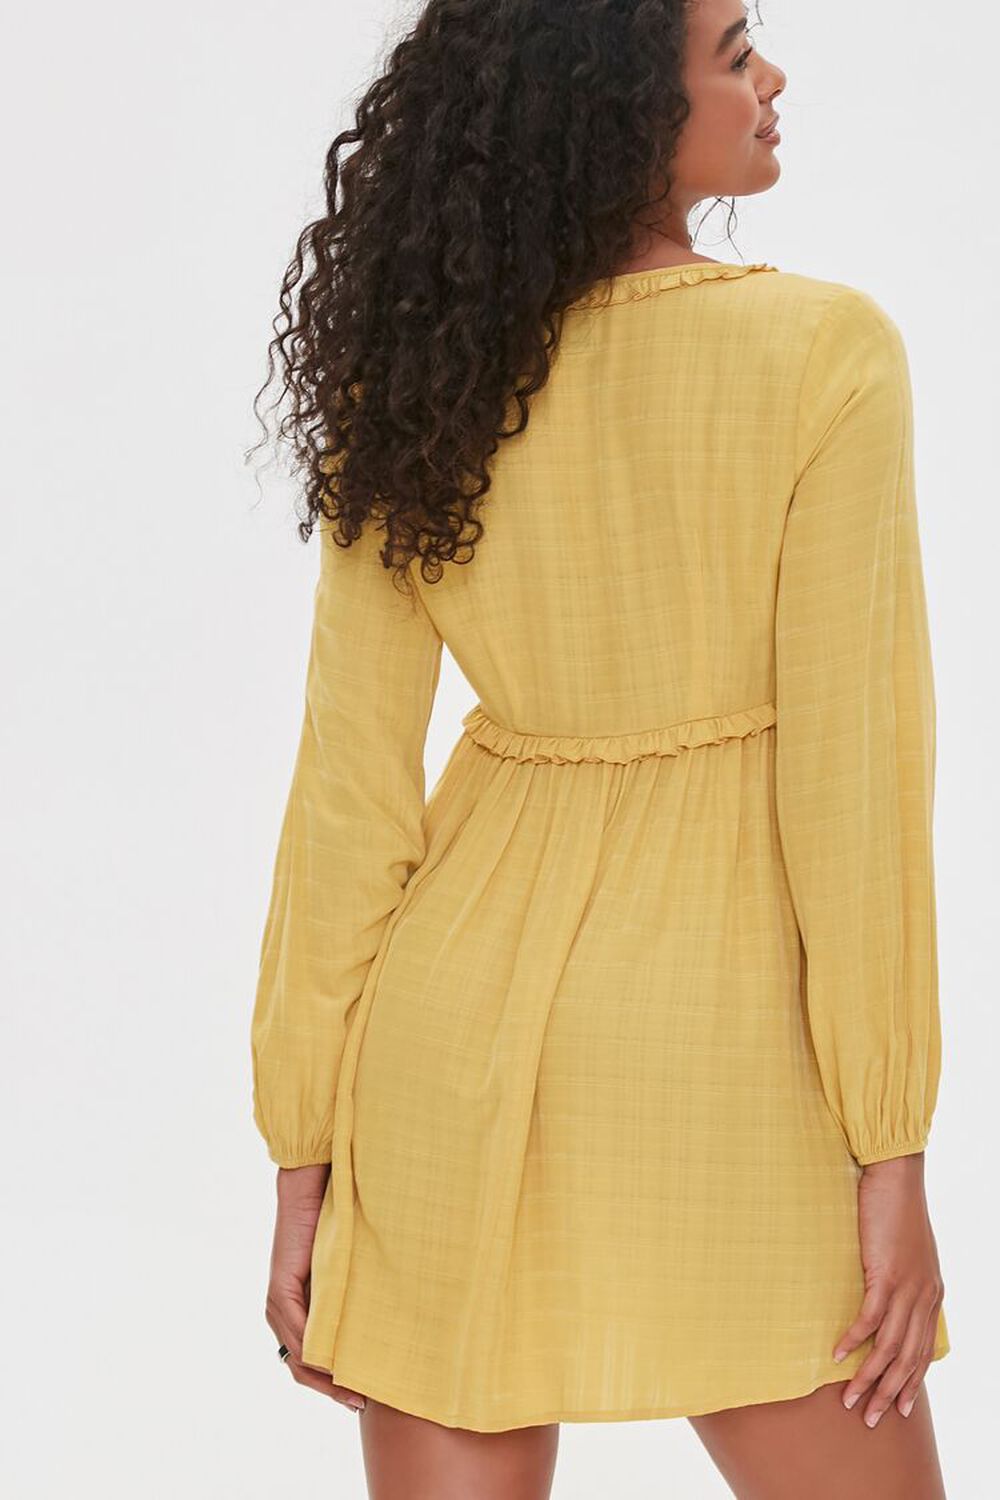 MUSTARD Buttoned Fit & Flare Dress, image 3